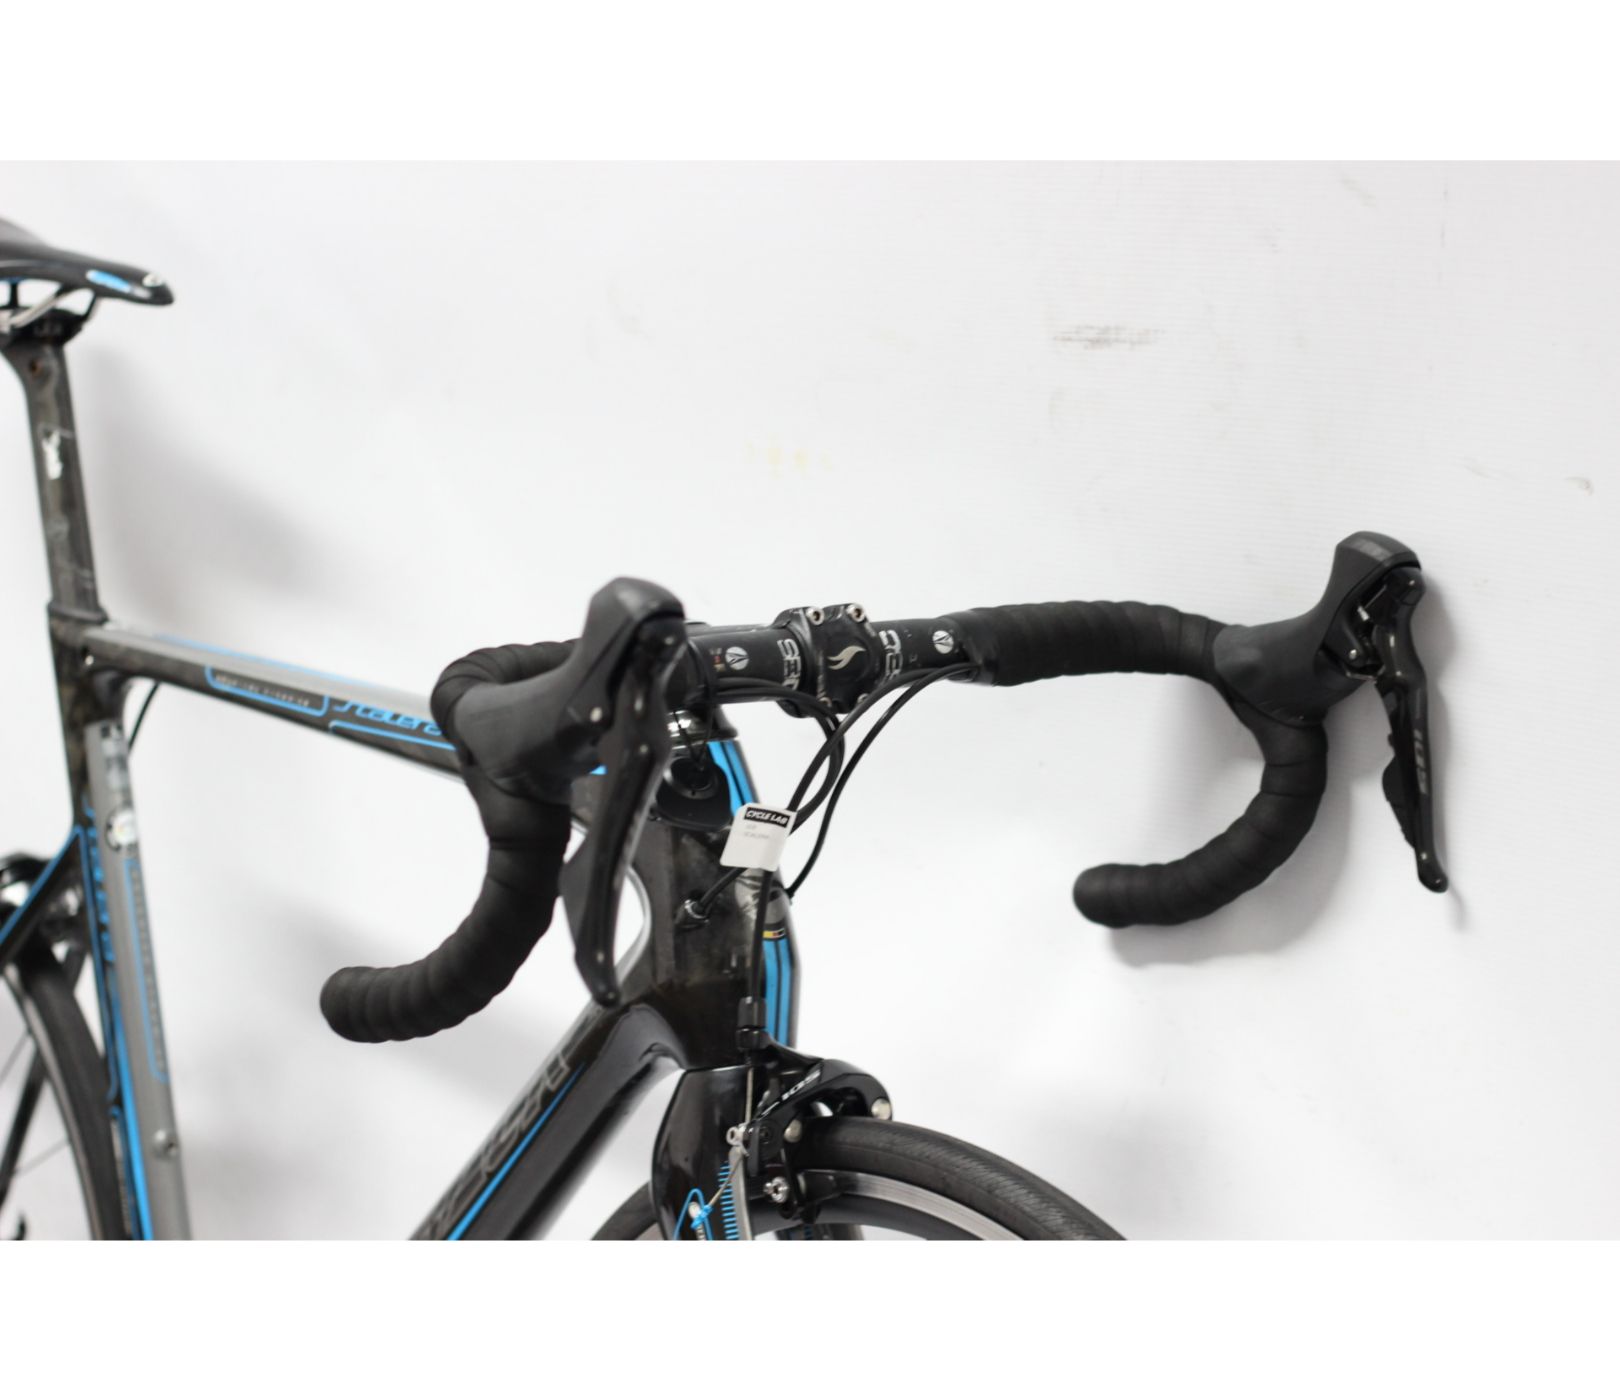 Pre-Owned Silverback Scalera Carbon Road Bike - 56 Large 